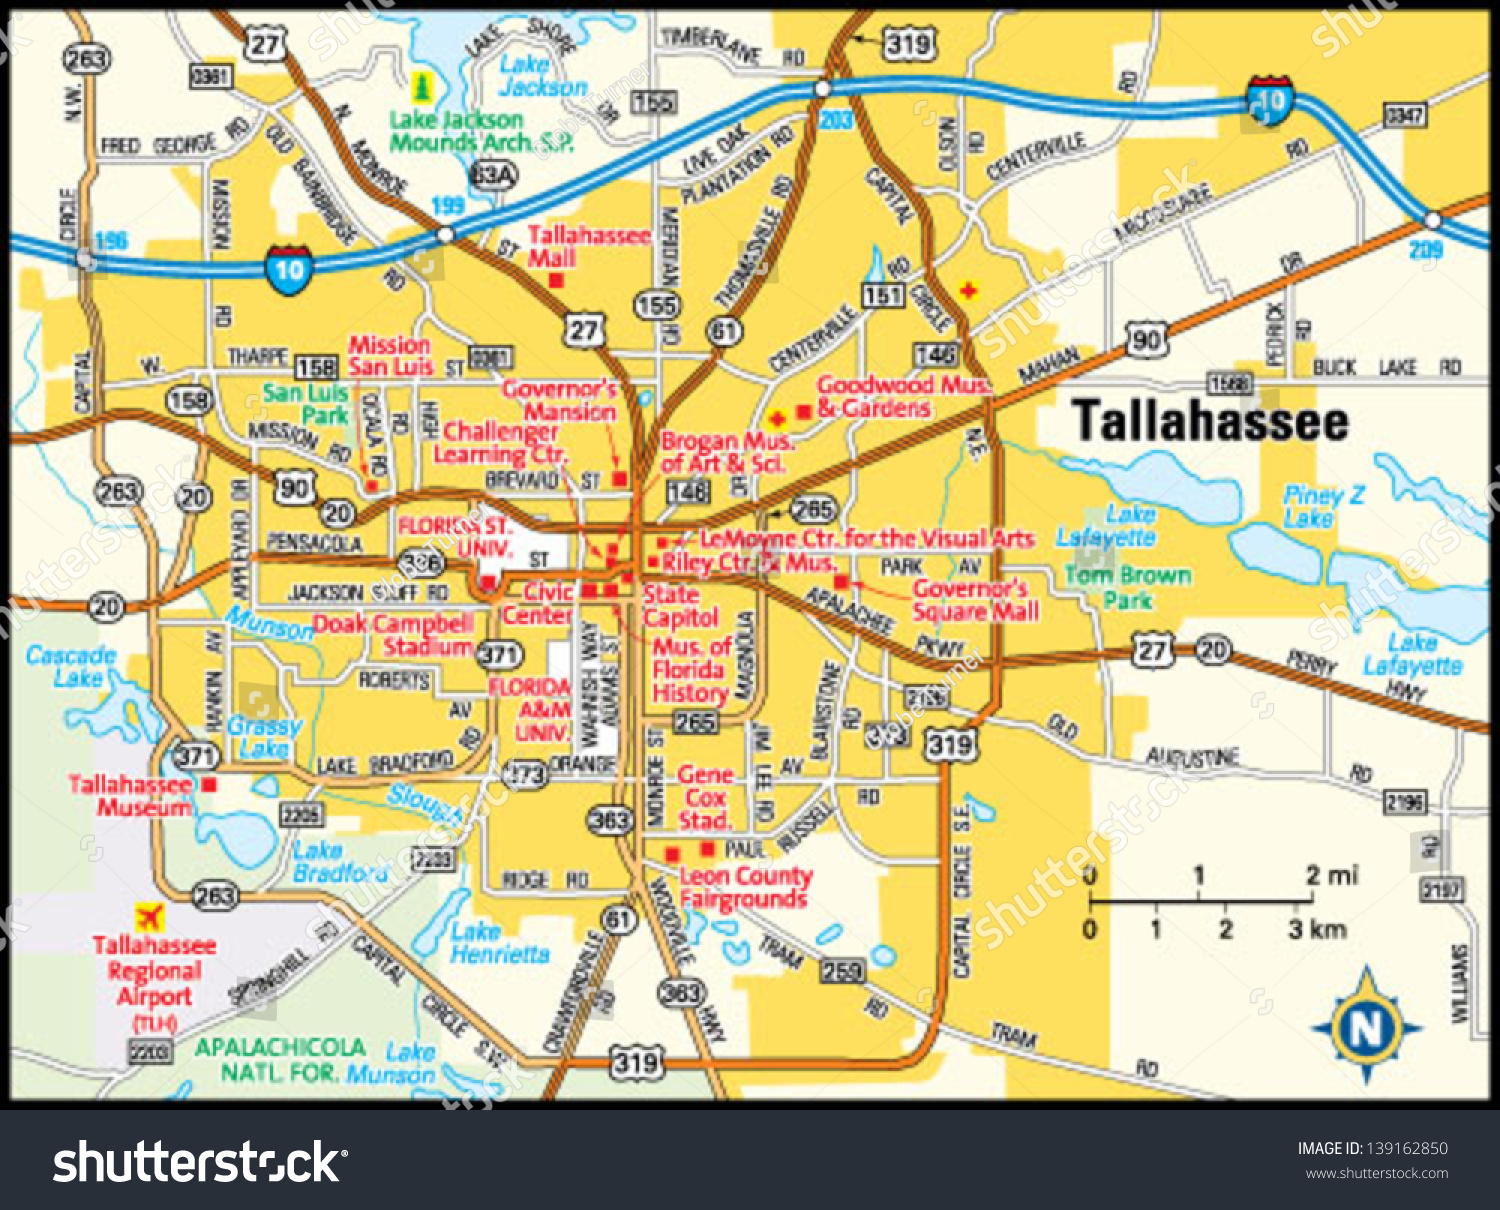 map of tallahassee florida area Tallahassee Florida Area Map Stock Vector Royalty Free 139162850 map of tallahassee florida area